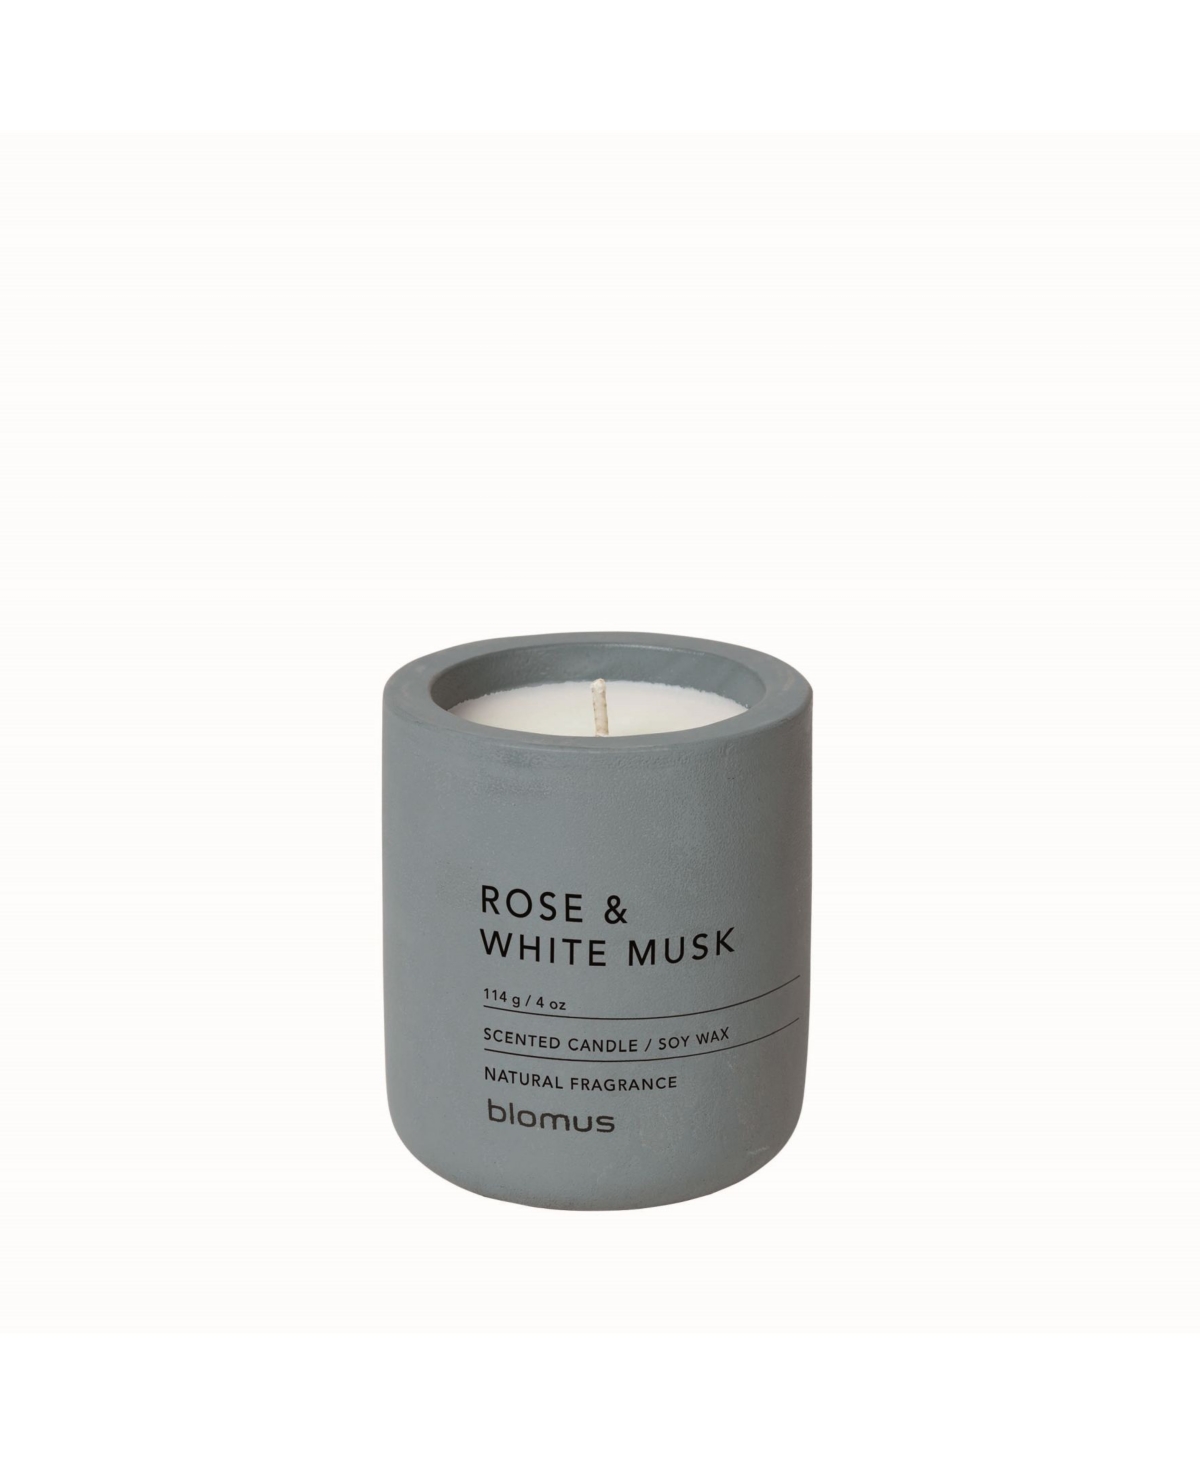 Fraga Rose or White Musk Fragrance 2.5 Scented Candle, 4 oz